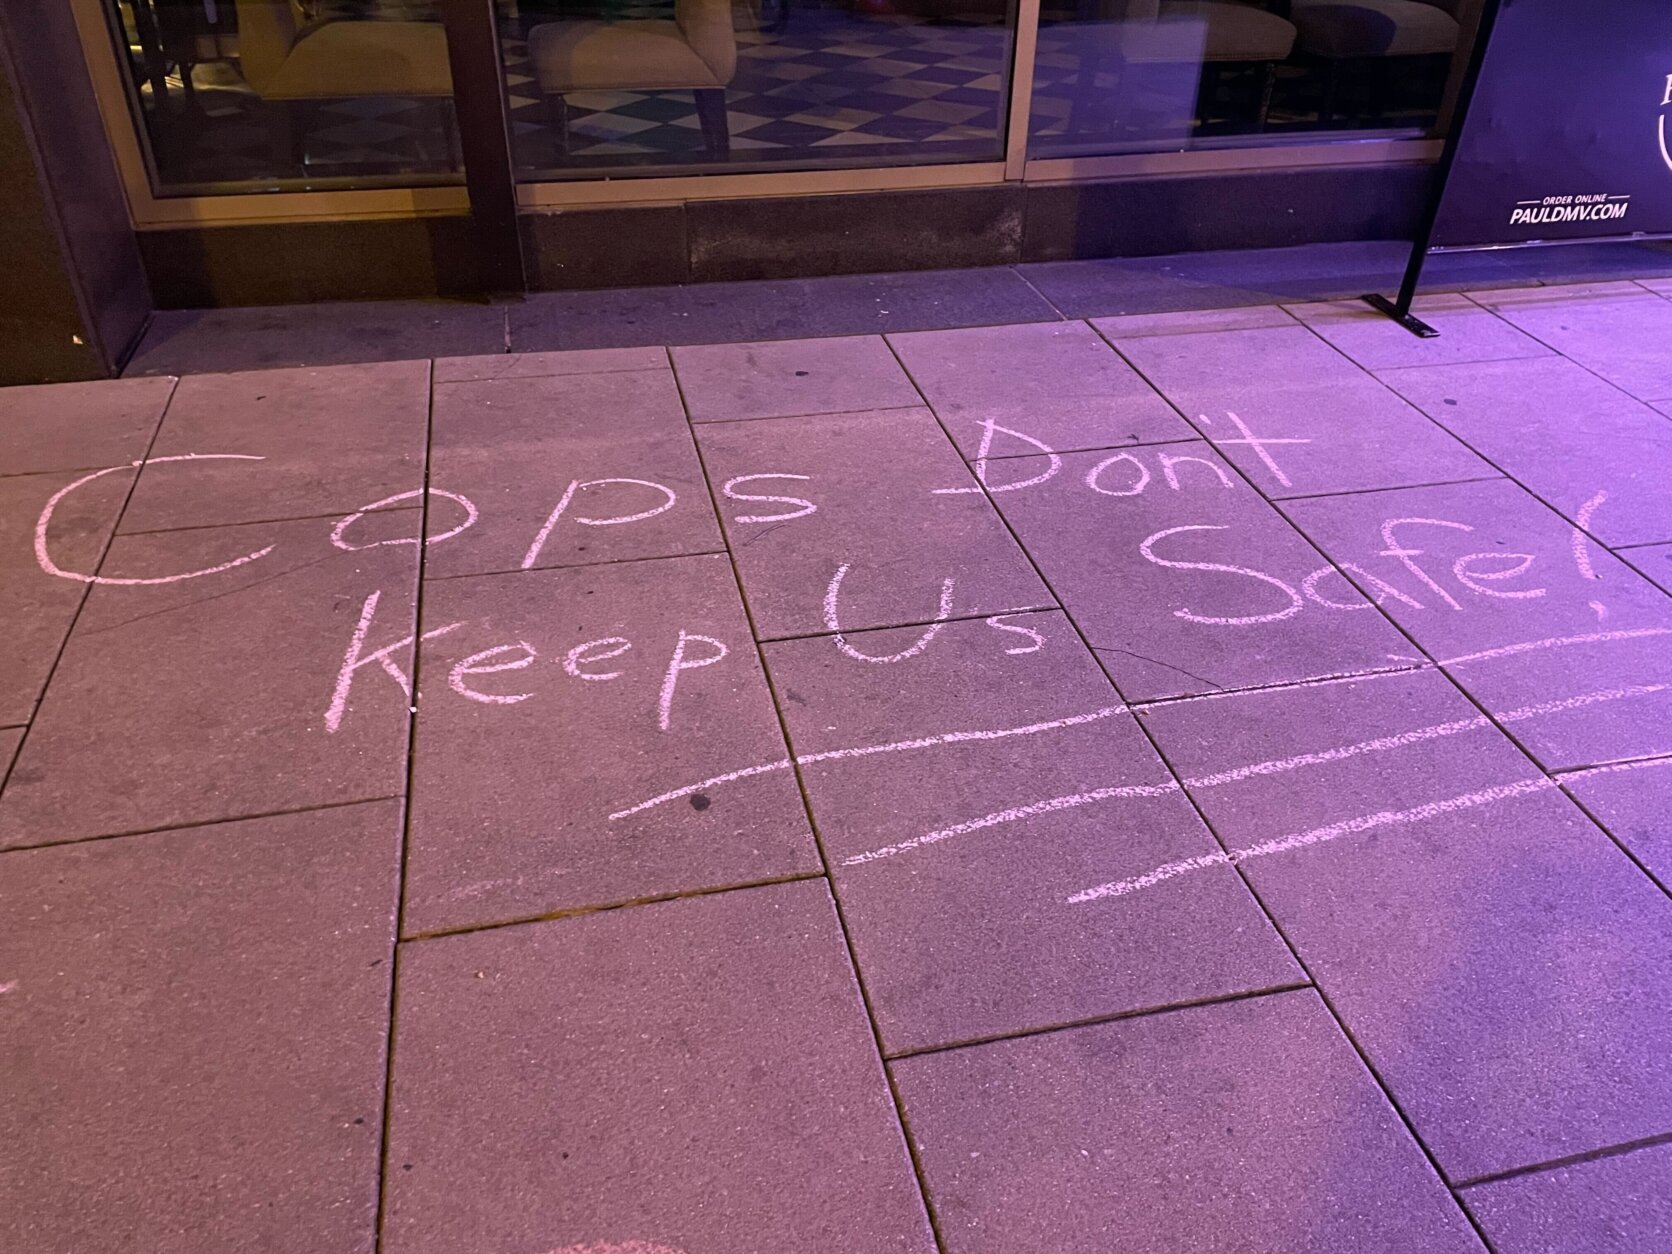 A sidewalk in downtown D.C. that reads "Cops don't keep us safe!"